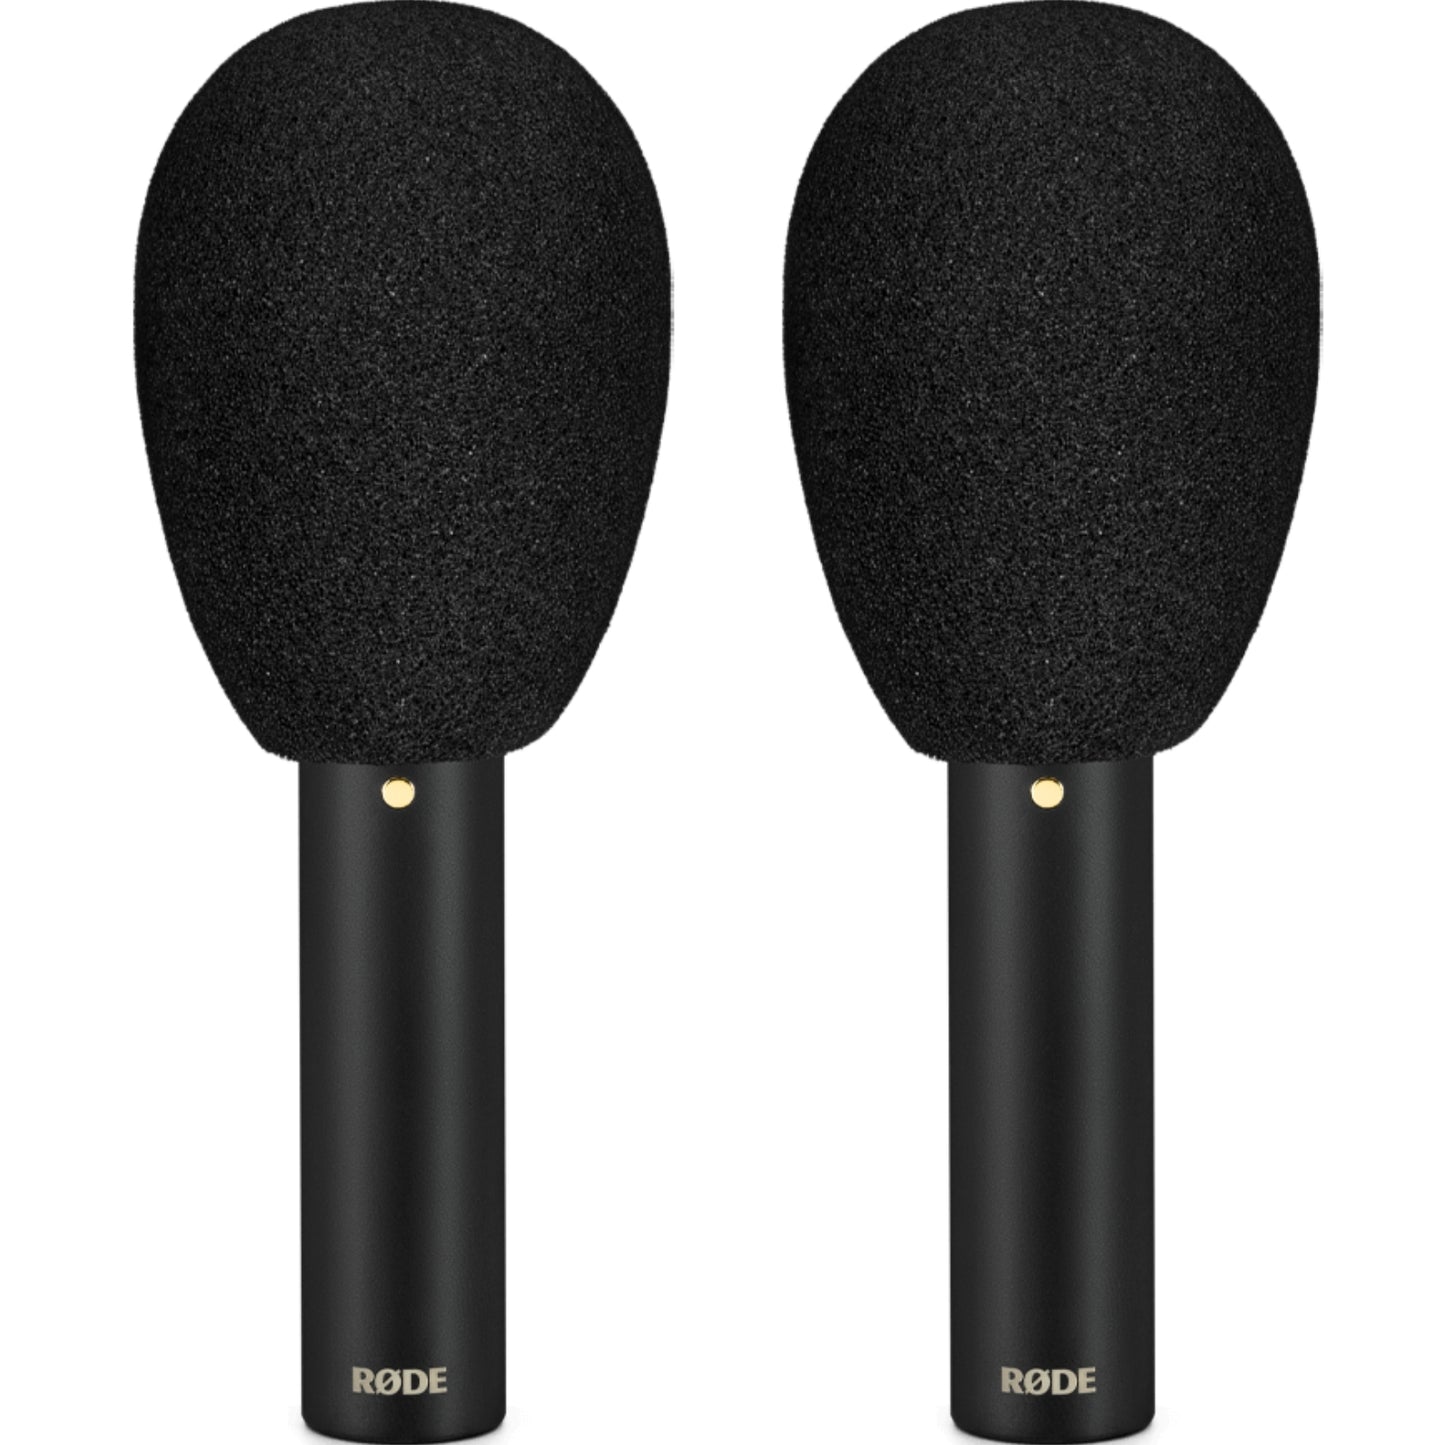 Rode TF-5 MP Cardioid Condenser Microphones - MyMobile